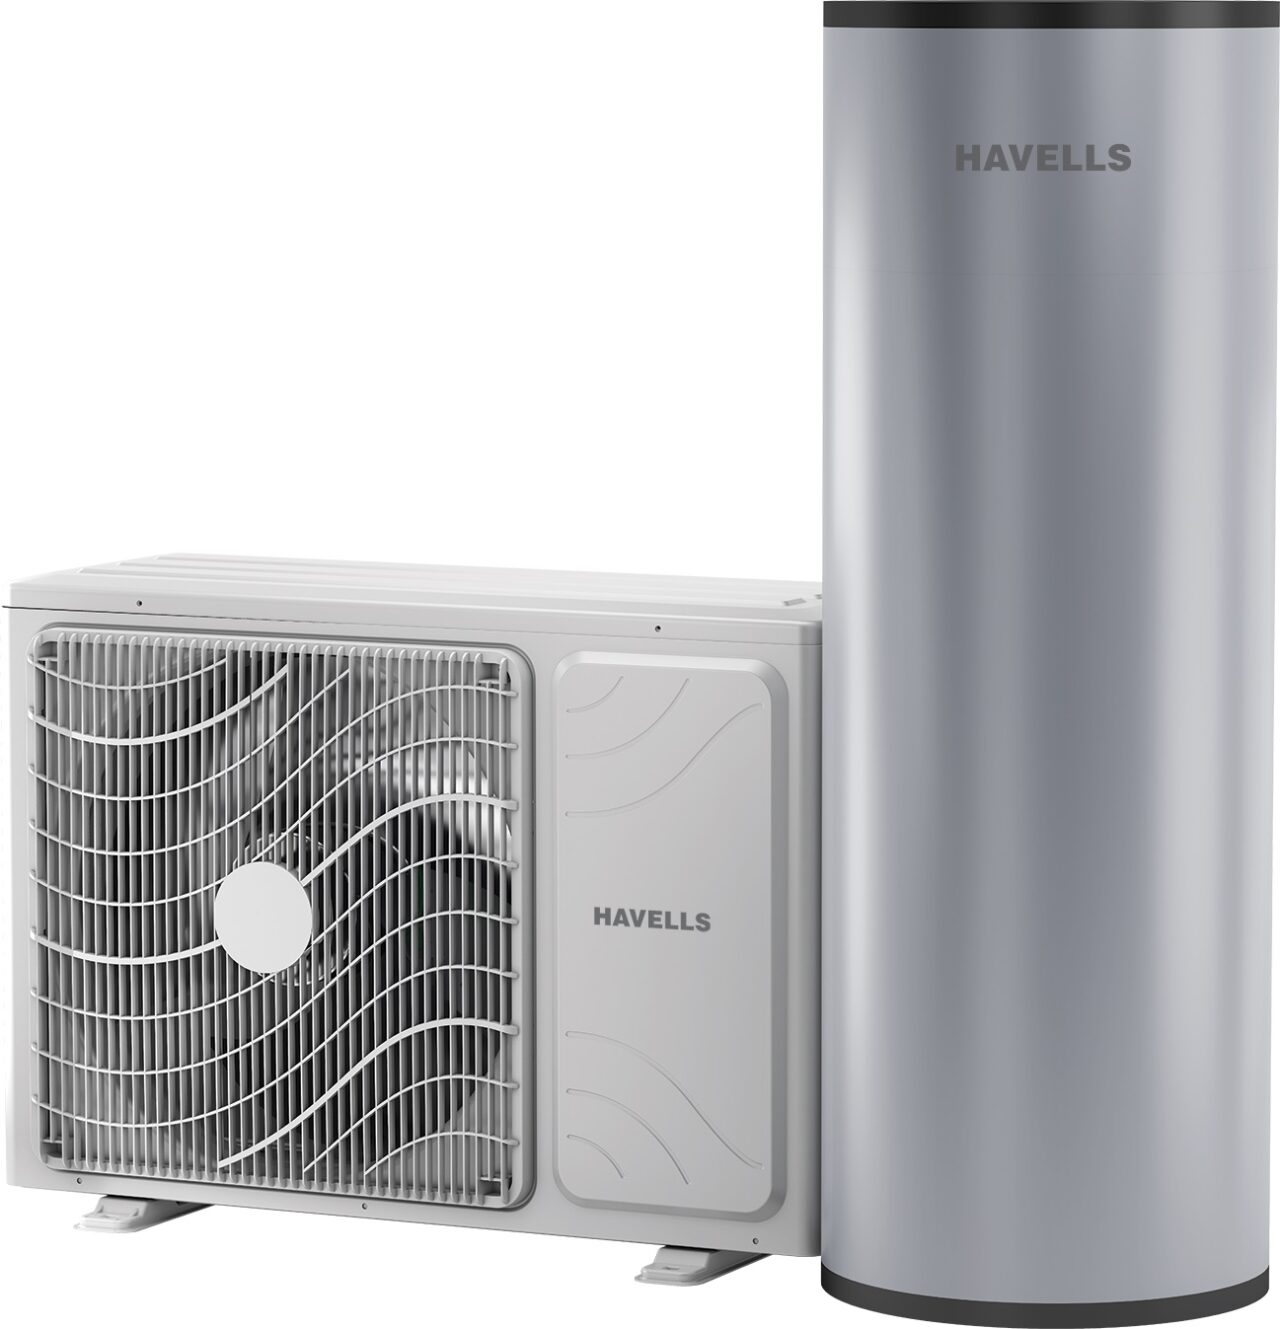 Havells Launches India's First Indigenous Energy-Efficient Heat Pump Water Heaters